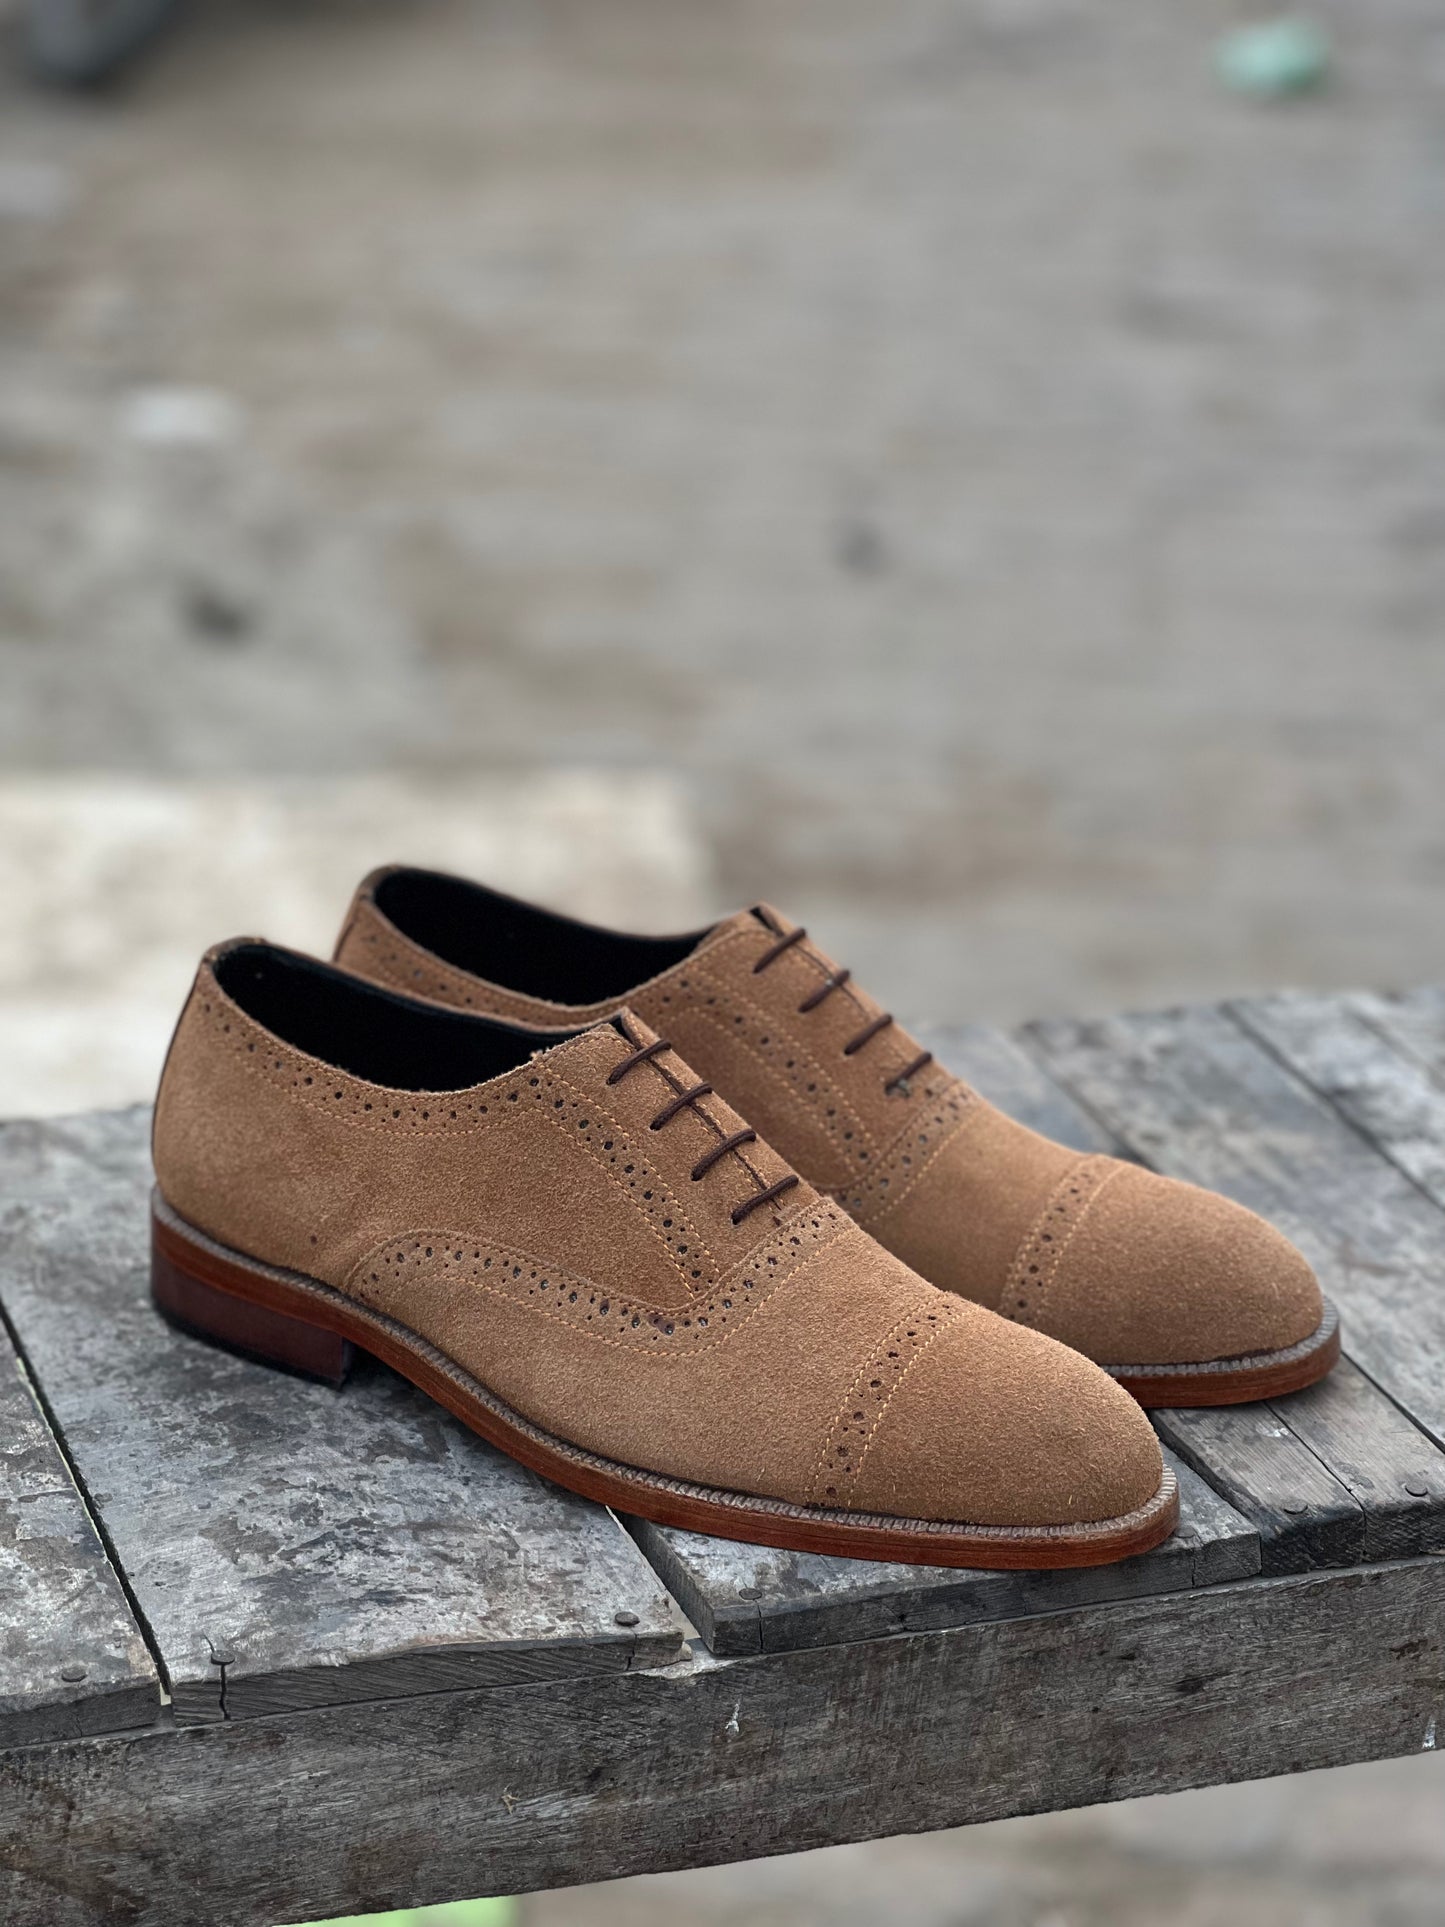 Royal Italian Suede Camel Formal Laced Shoe